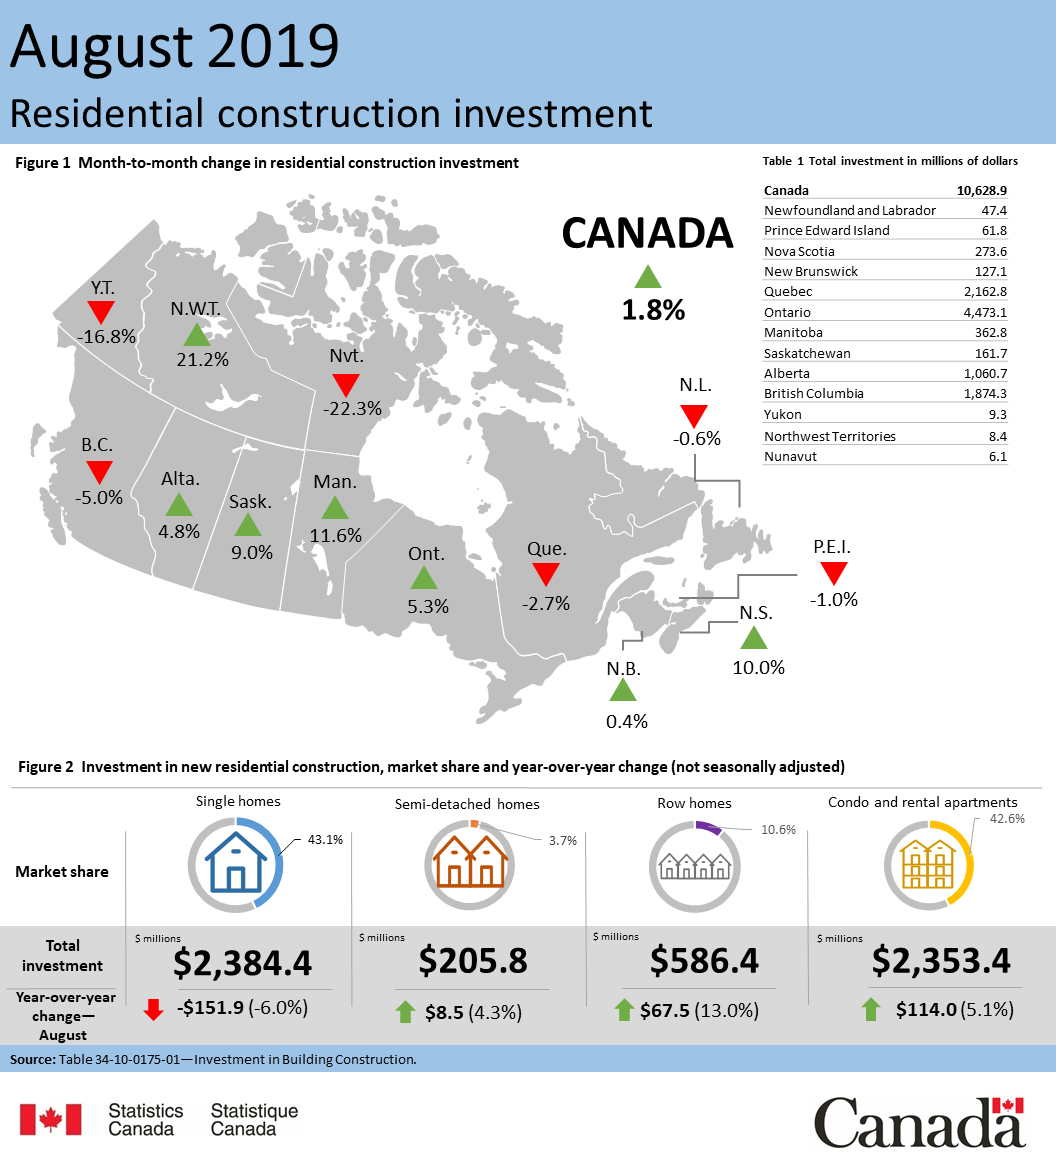 Thumbnail for Infographic 1: Residential construction investment, August 2019